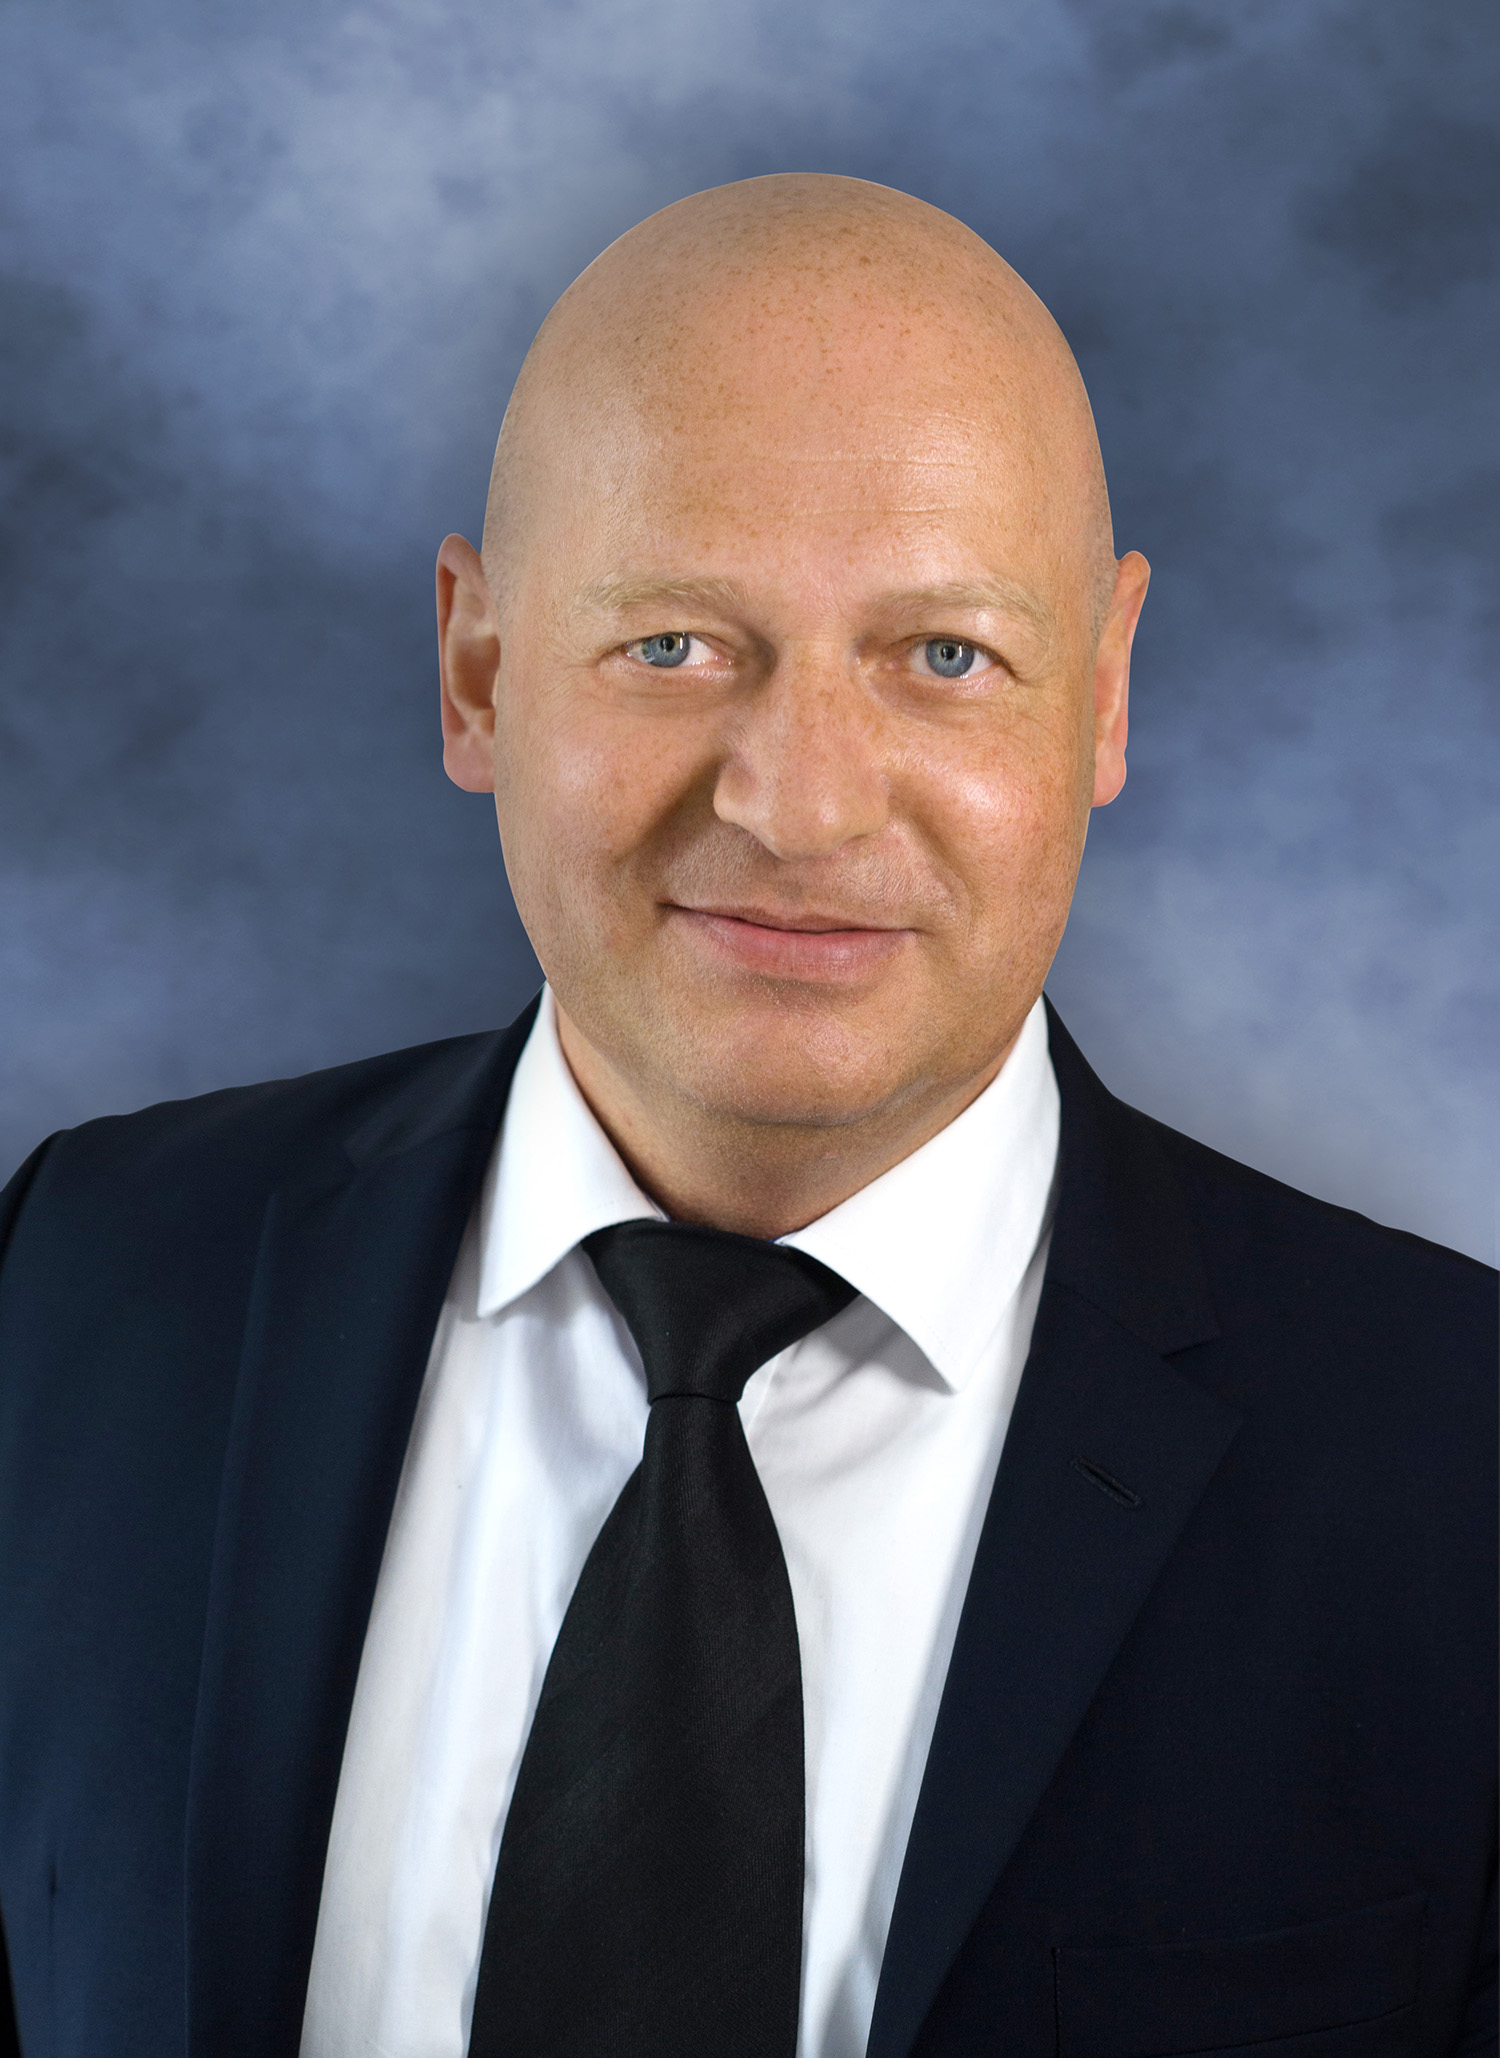 Thomas Holm has been appointed vice president of global sales at Bettcher Industries, Inc. Prior to his promotion, he was managing director of Bettcher GmbH, the company’s European subsidiary company.